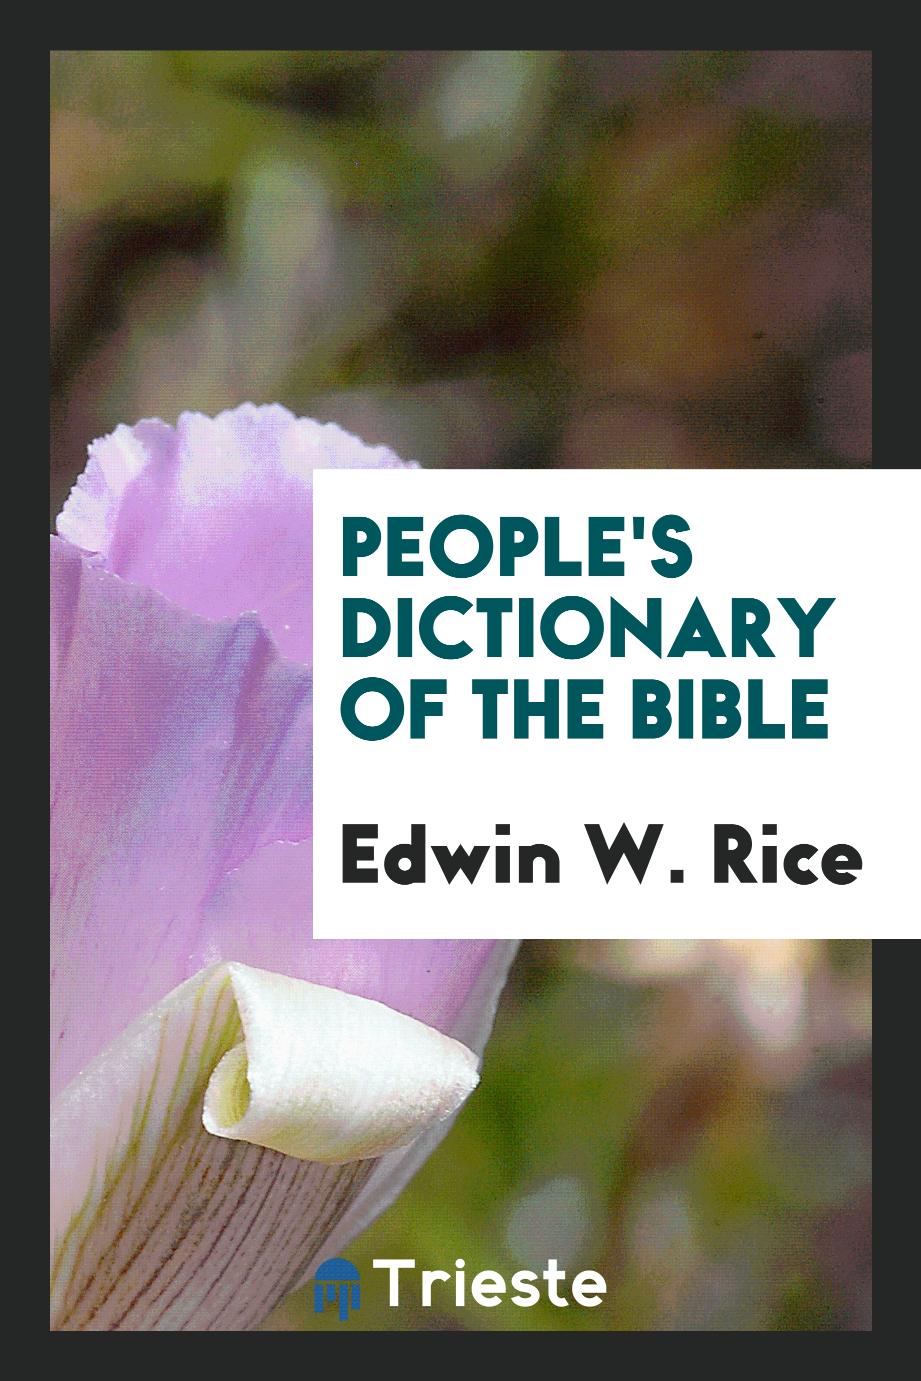 People's dictionary of the Bible